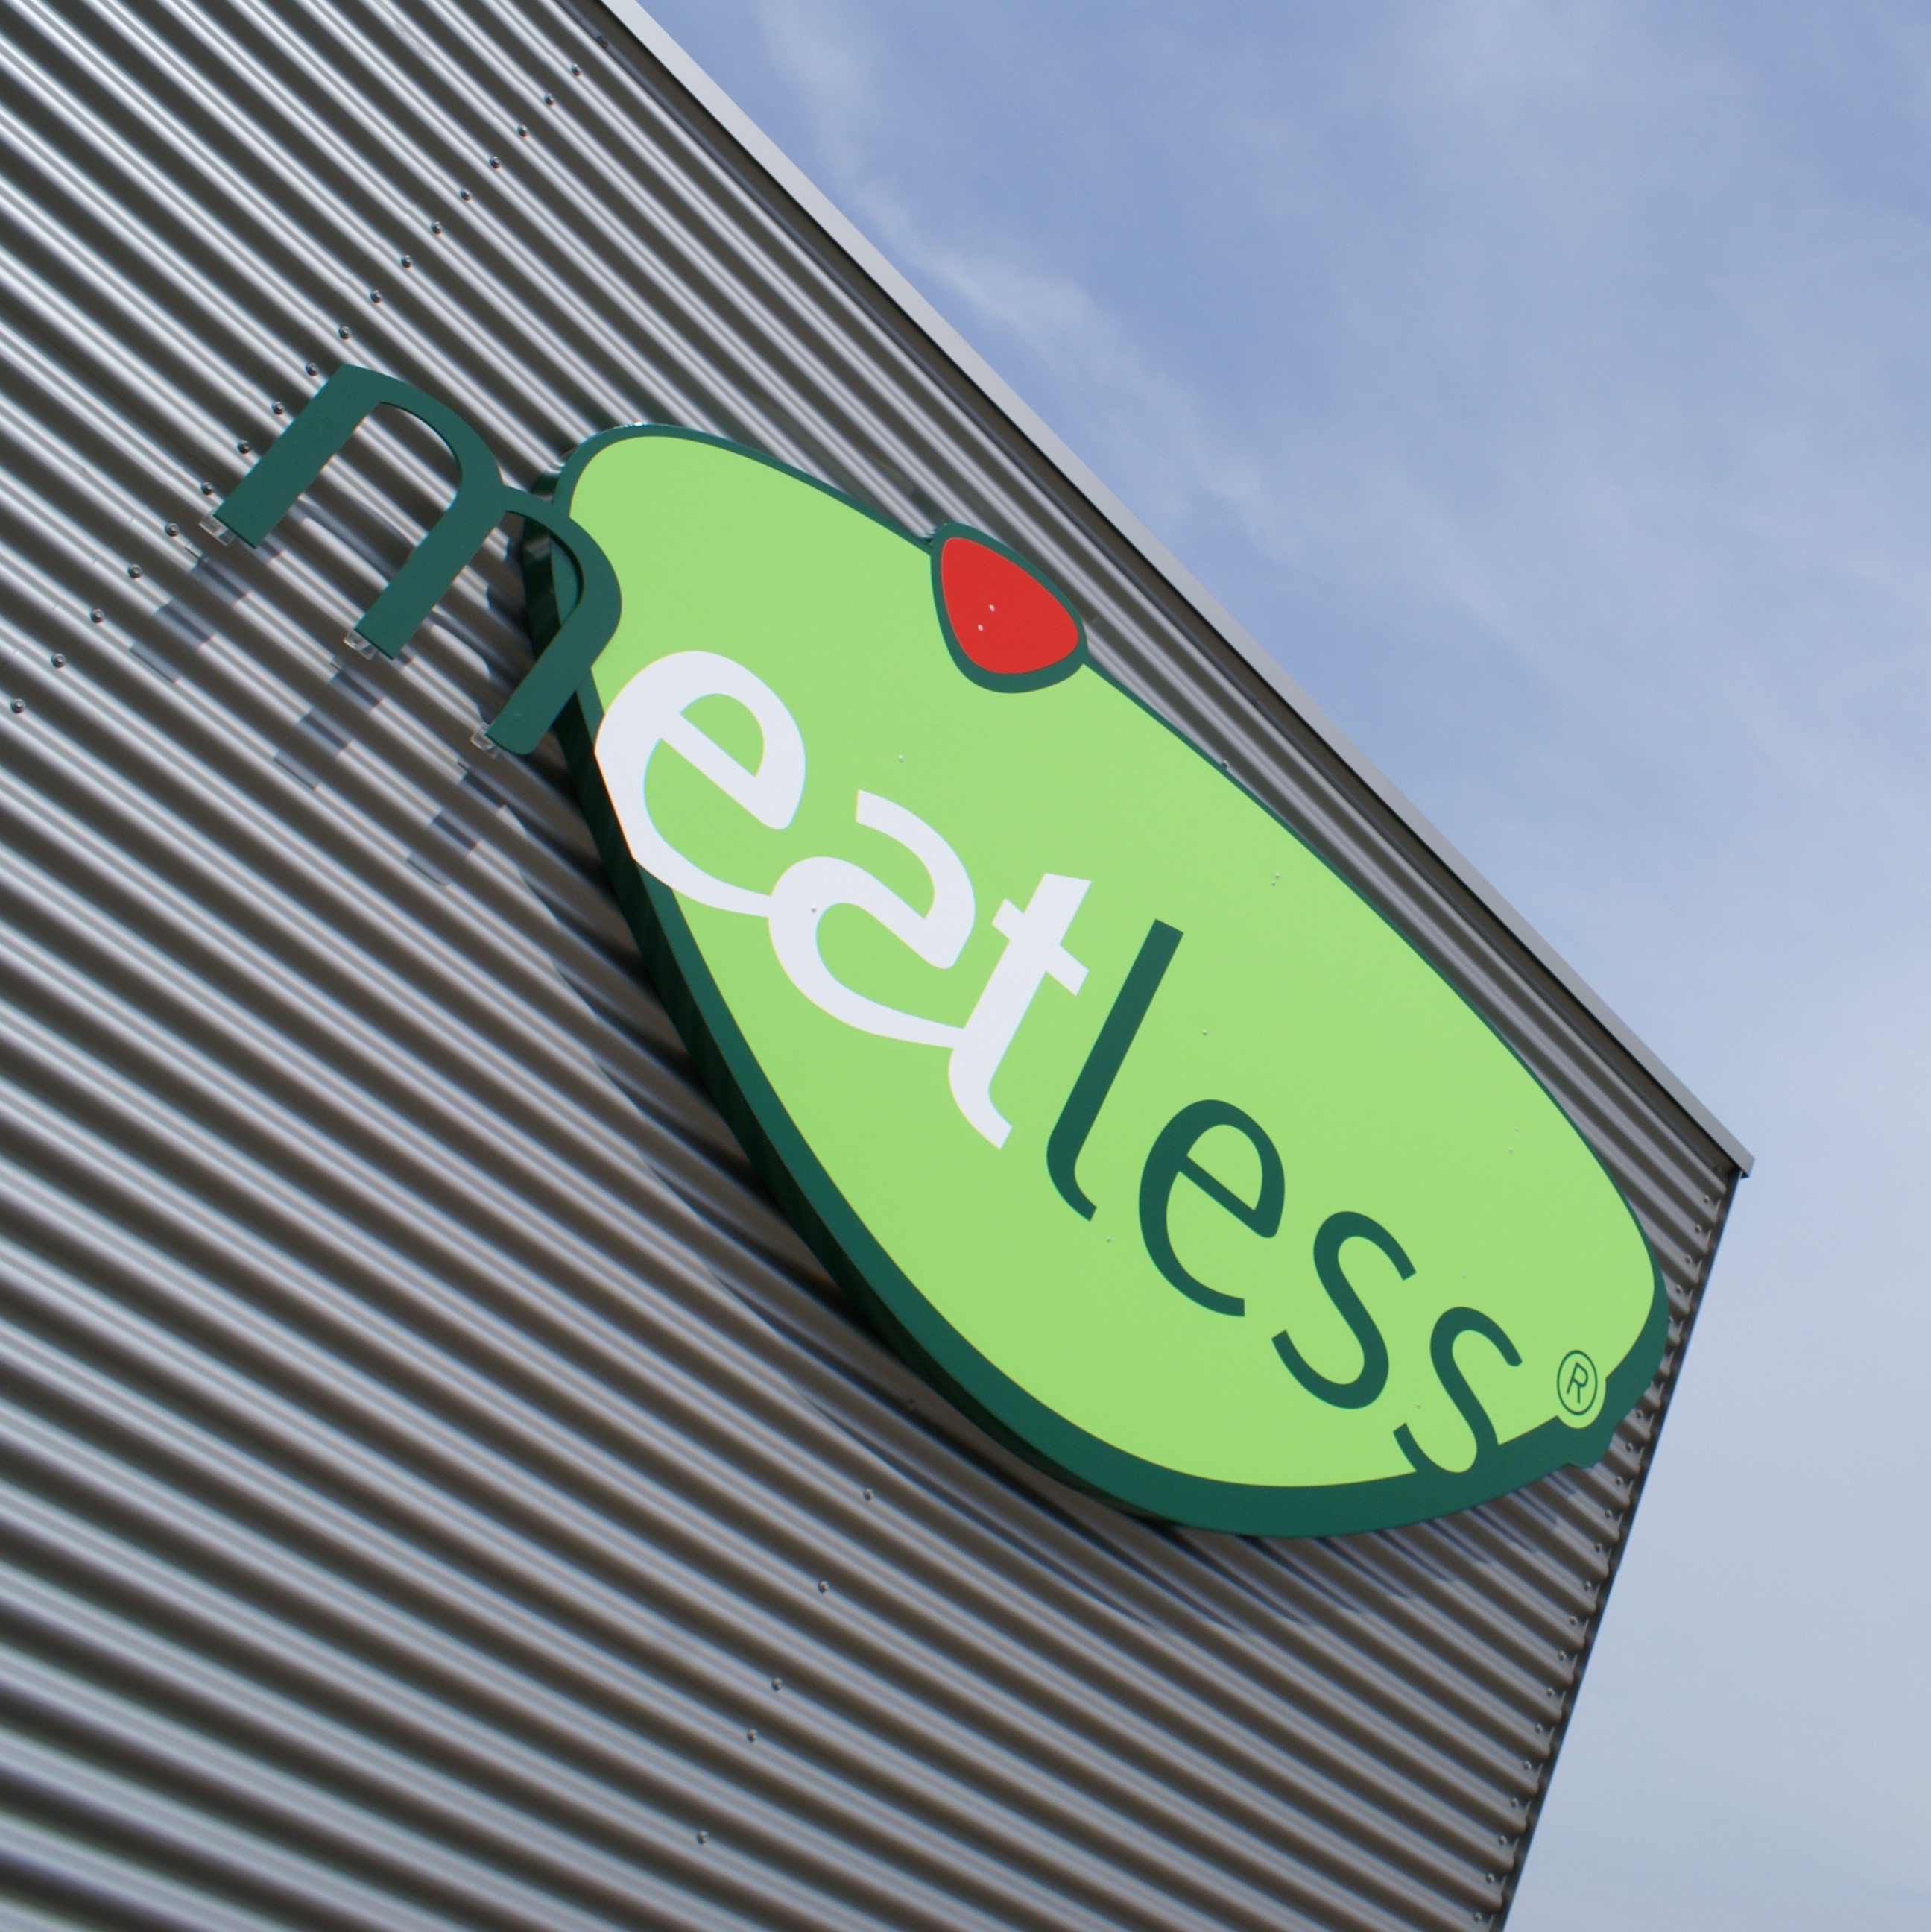 BENEO acquires Meatless BV, a portfolio company of SHIFT Invest I